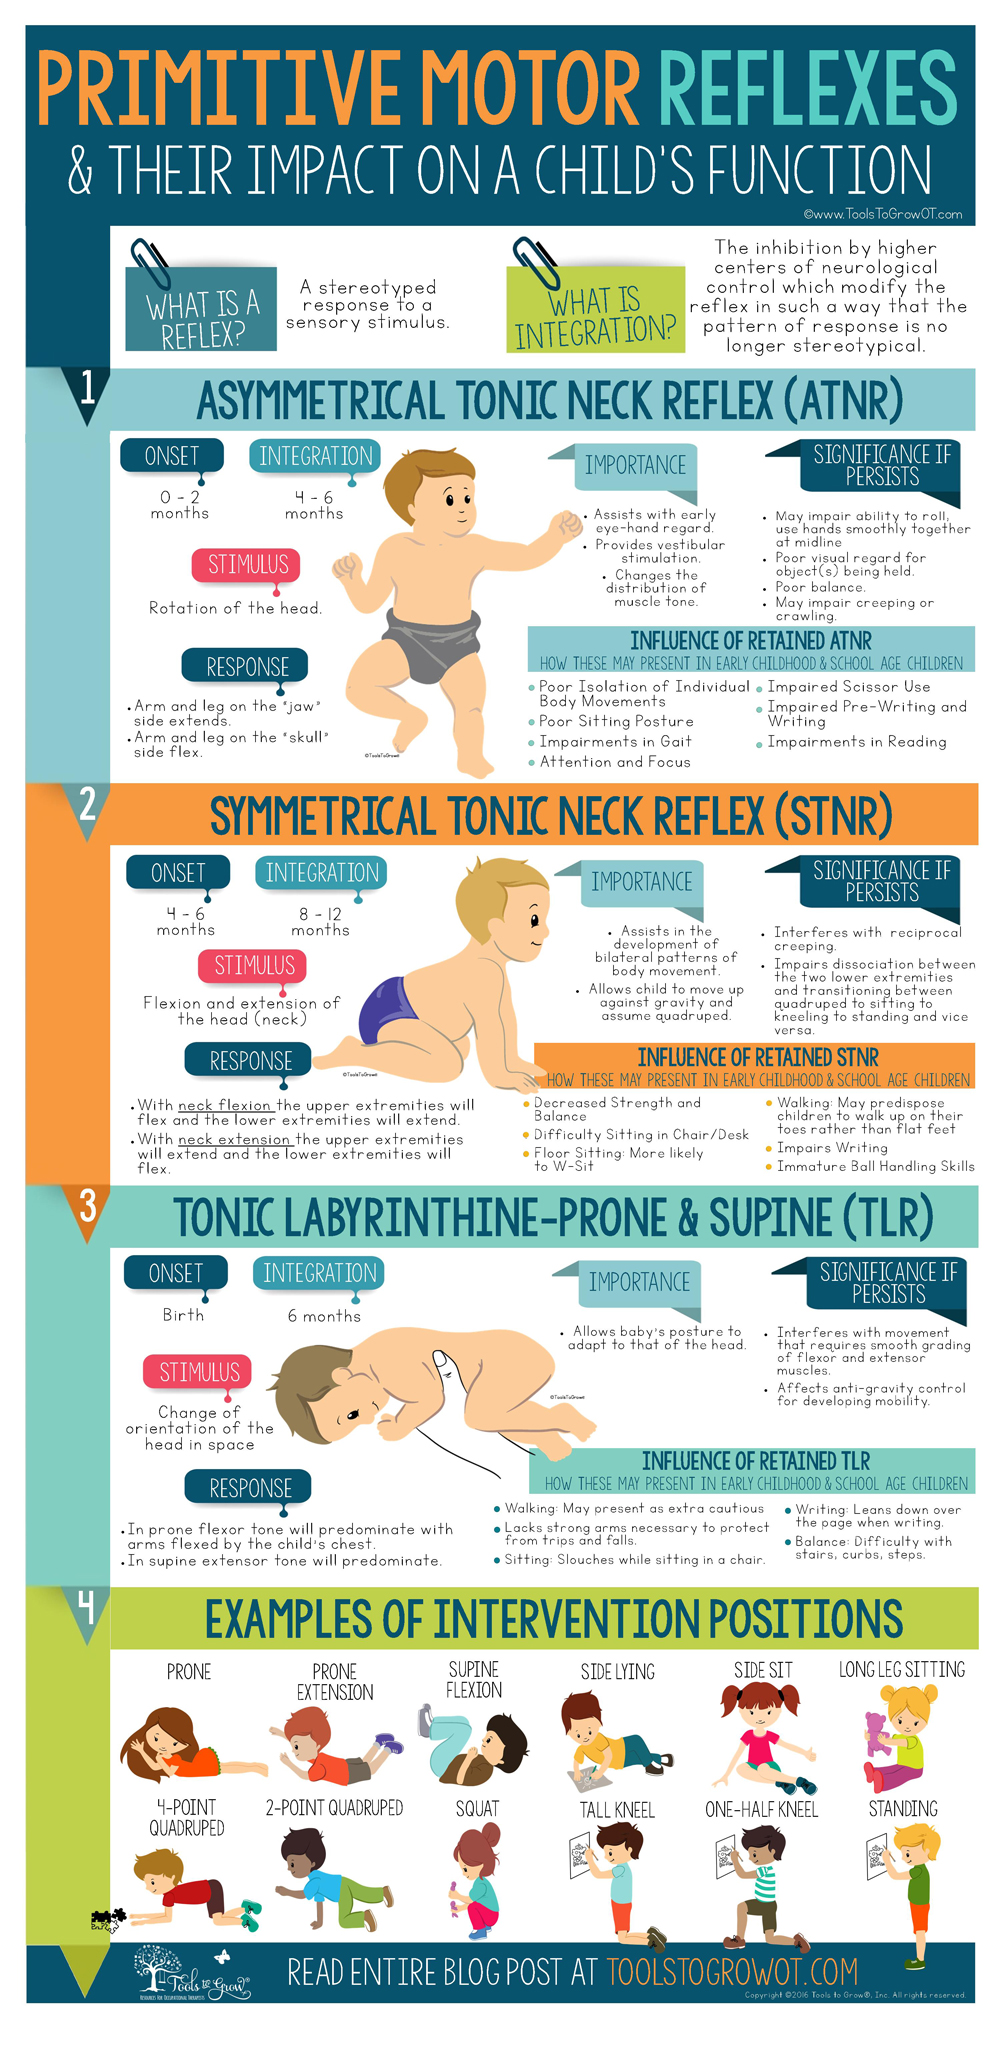 Infographic - Primitive Motor Reflexes & Their Impact on a Child's Function - Copyright ToolsToGrowOT.com